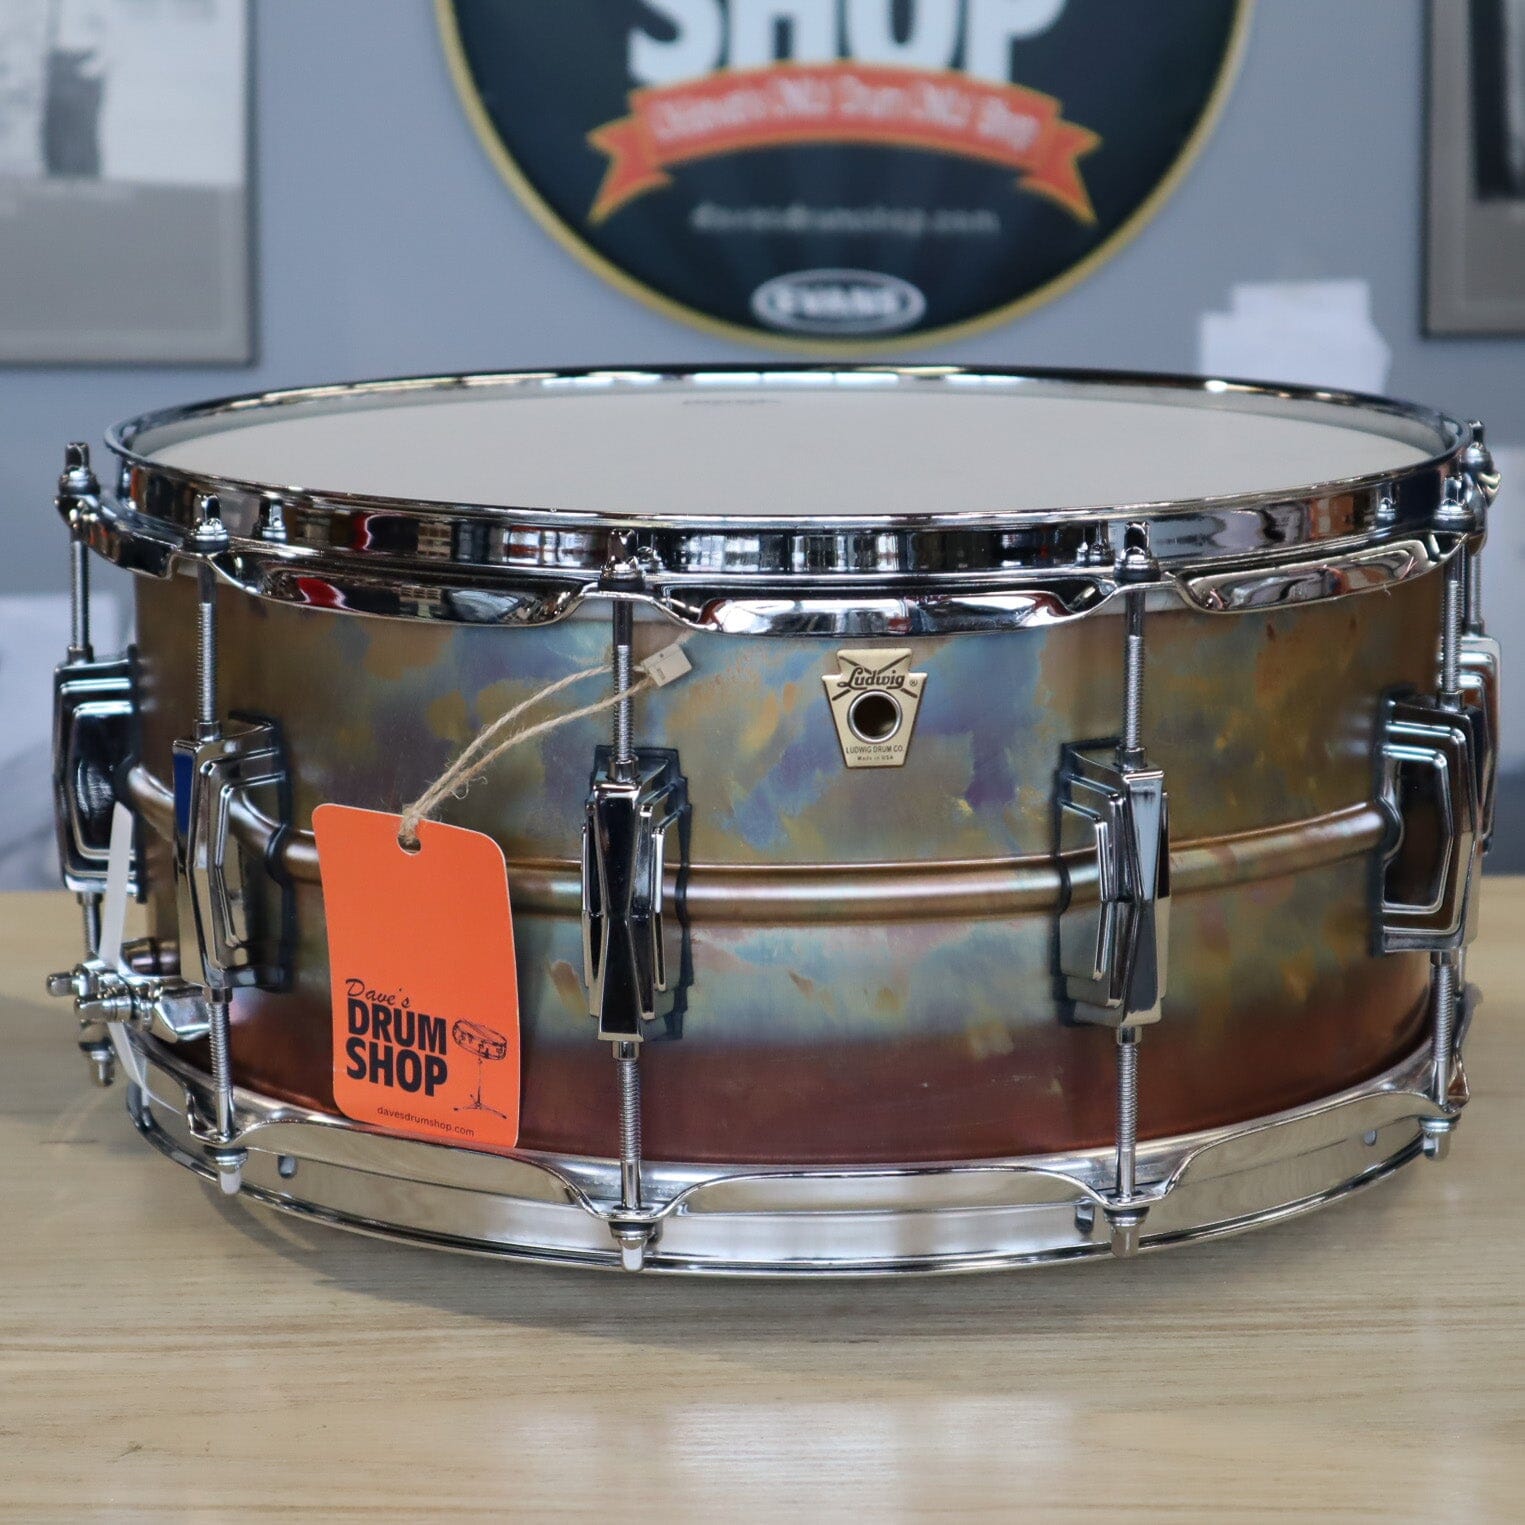 Ludwig 6.5x14" Raw Bronze Phonic Snare Drum w/ Imperial Lugs (LB552R) NEW SNARE DRUMS Ludwig 